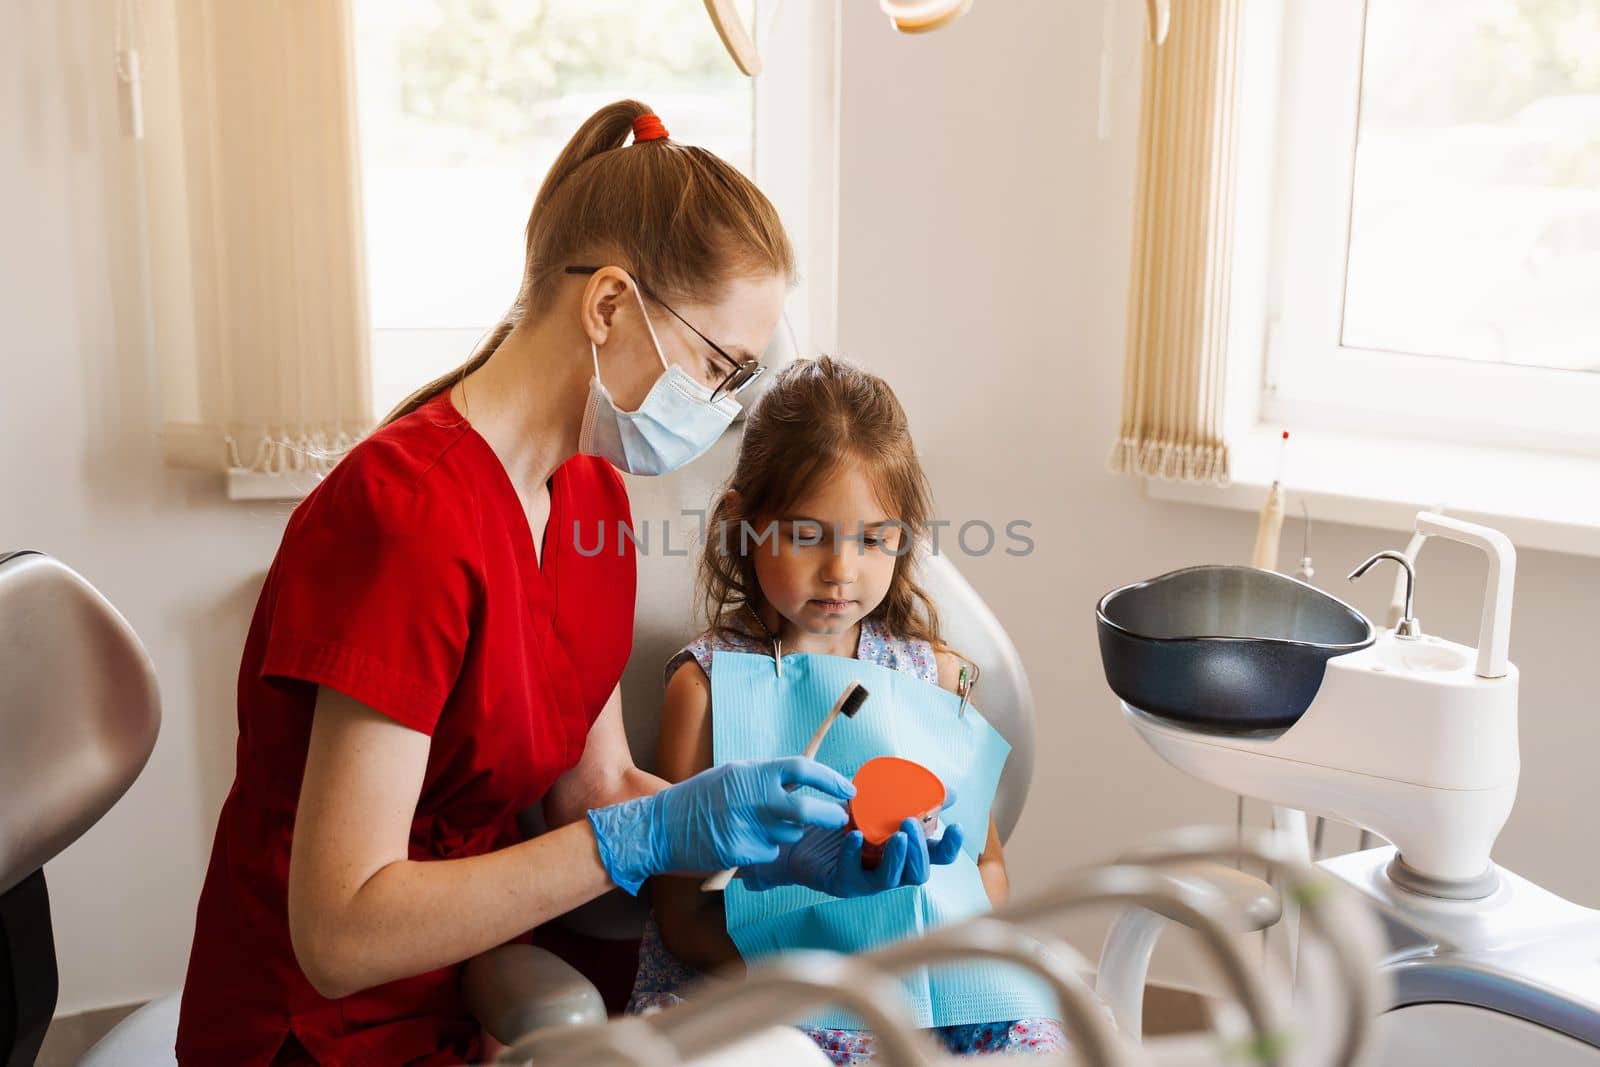 Dentist shows child how to properly use toothbrush for brush teeth. Jaw anatomical model teeth brushing. Pediatric dentist teaching oral hygiene lesson for kids in dentistry. by Rabizo